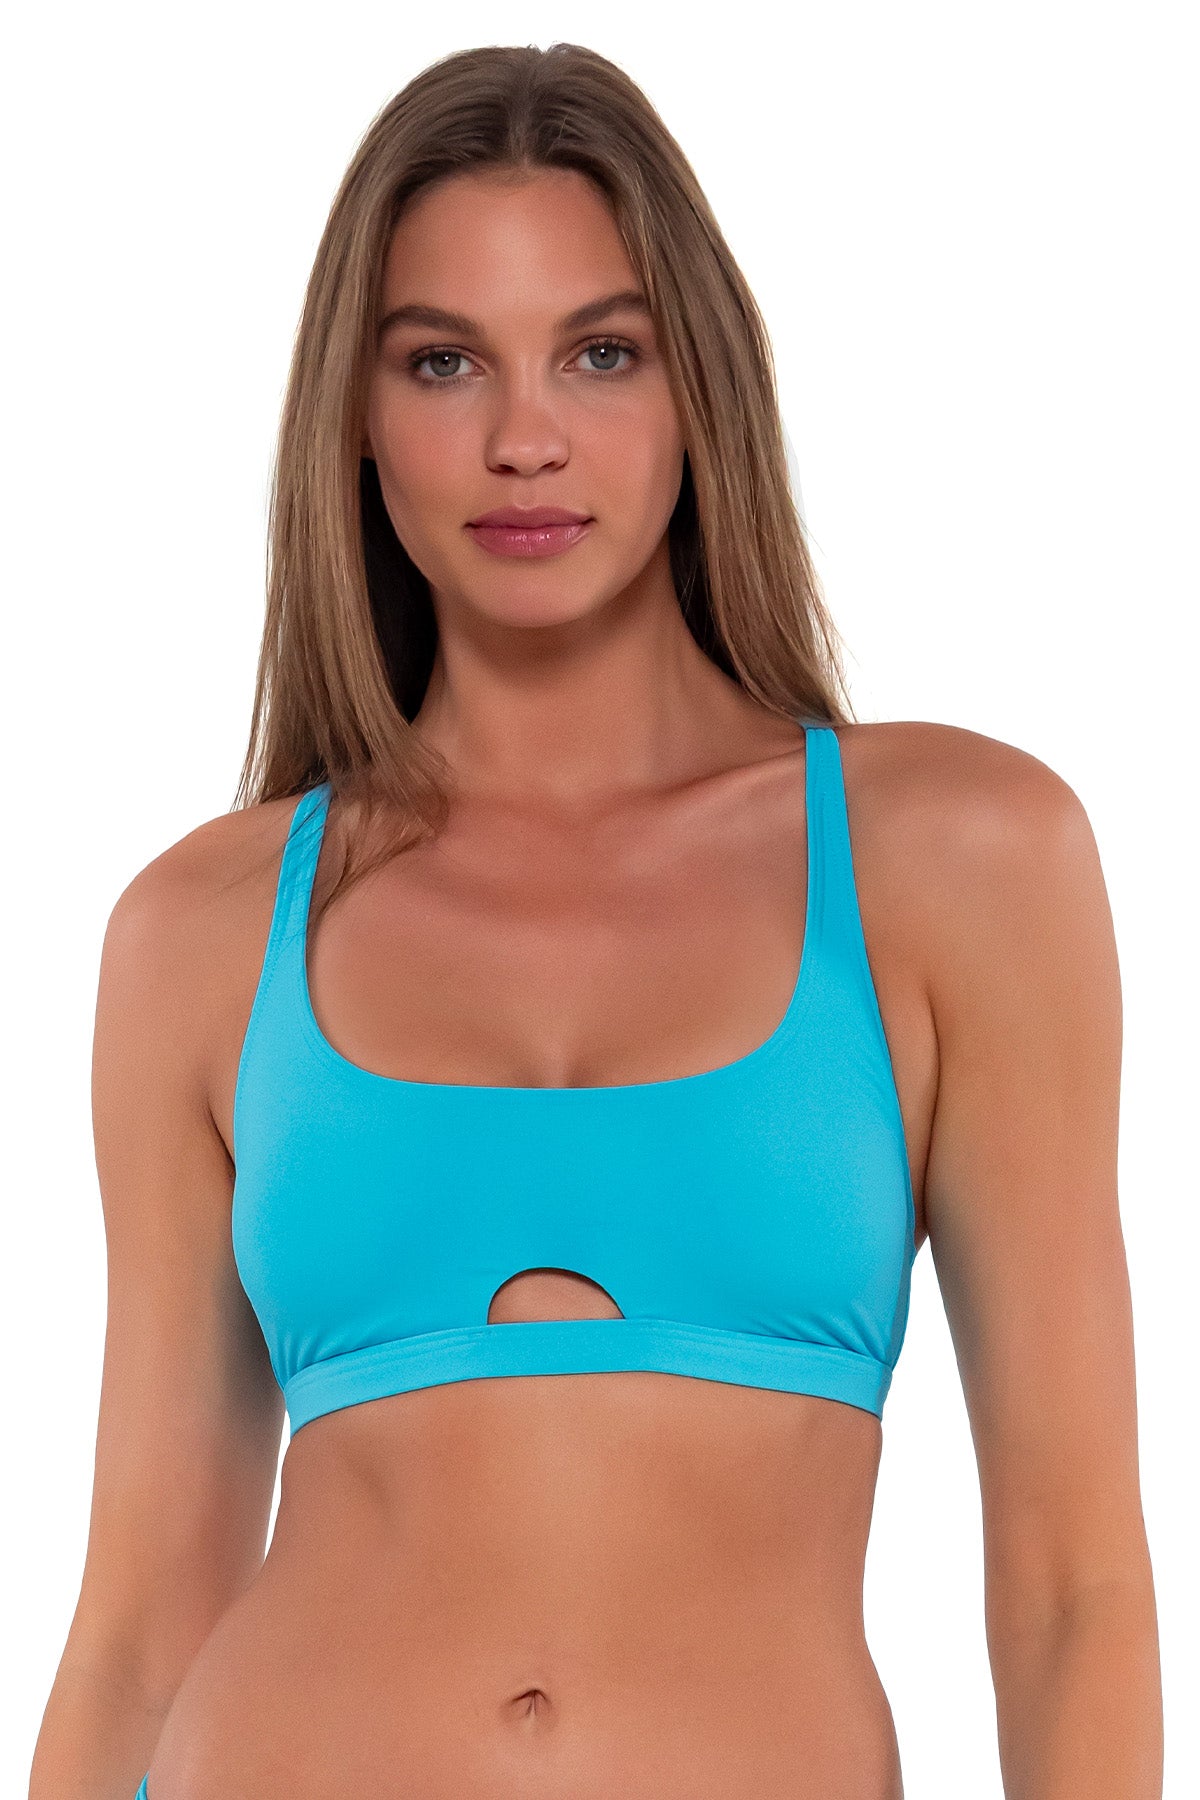 Front pose #1 of Daria wearing Sunsets Blue Bliss Brandi Bralette Top